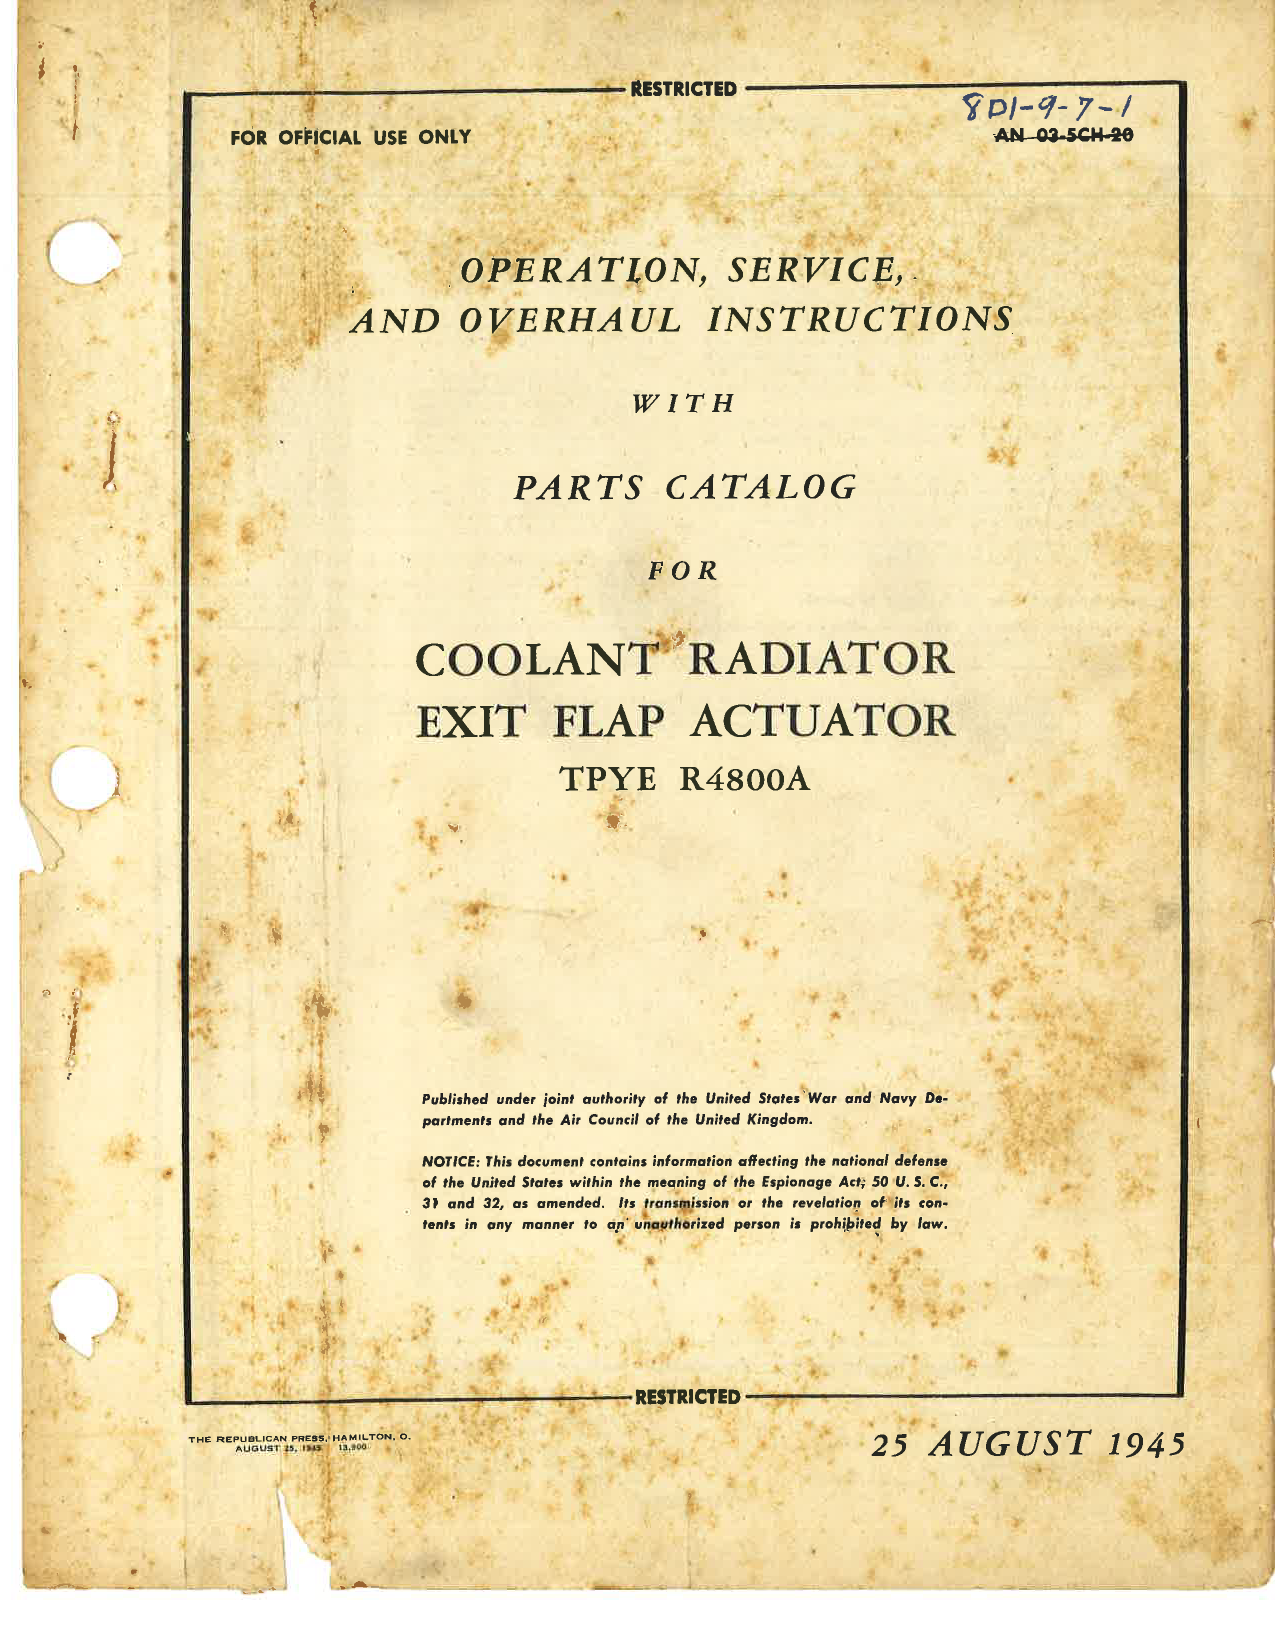 Sample page 1 from AirCorps Library document: Operation, Service & Overhaul Instructions with Parts Catalog for Coolant Radiator Exit Flap Actuator Type R4800A